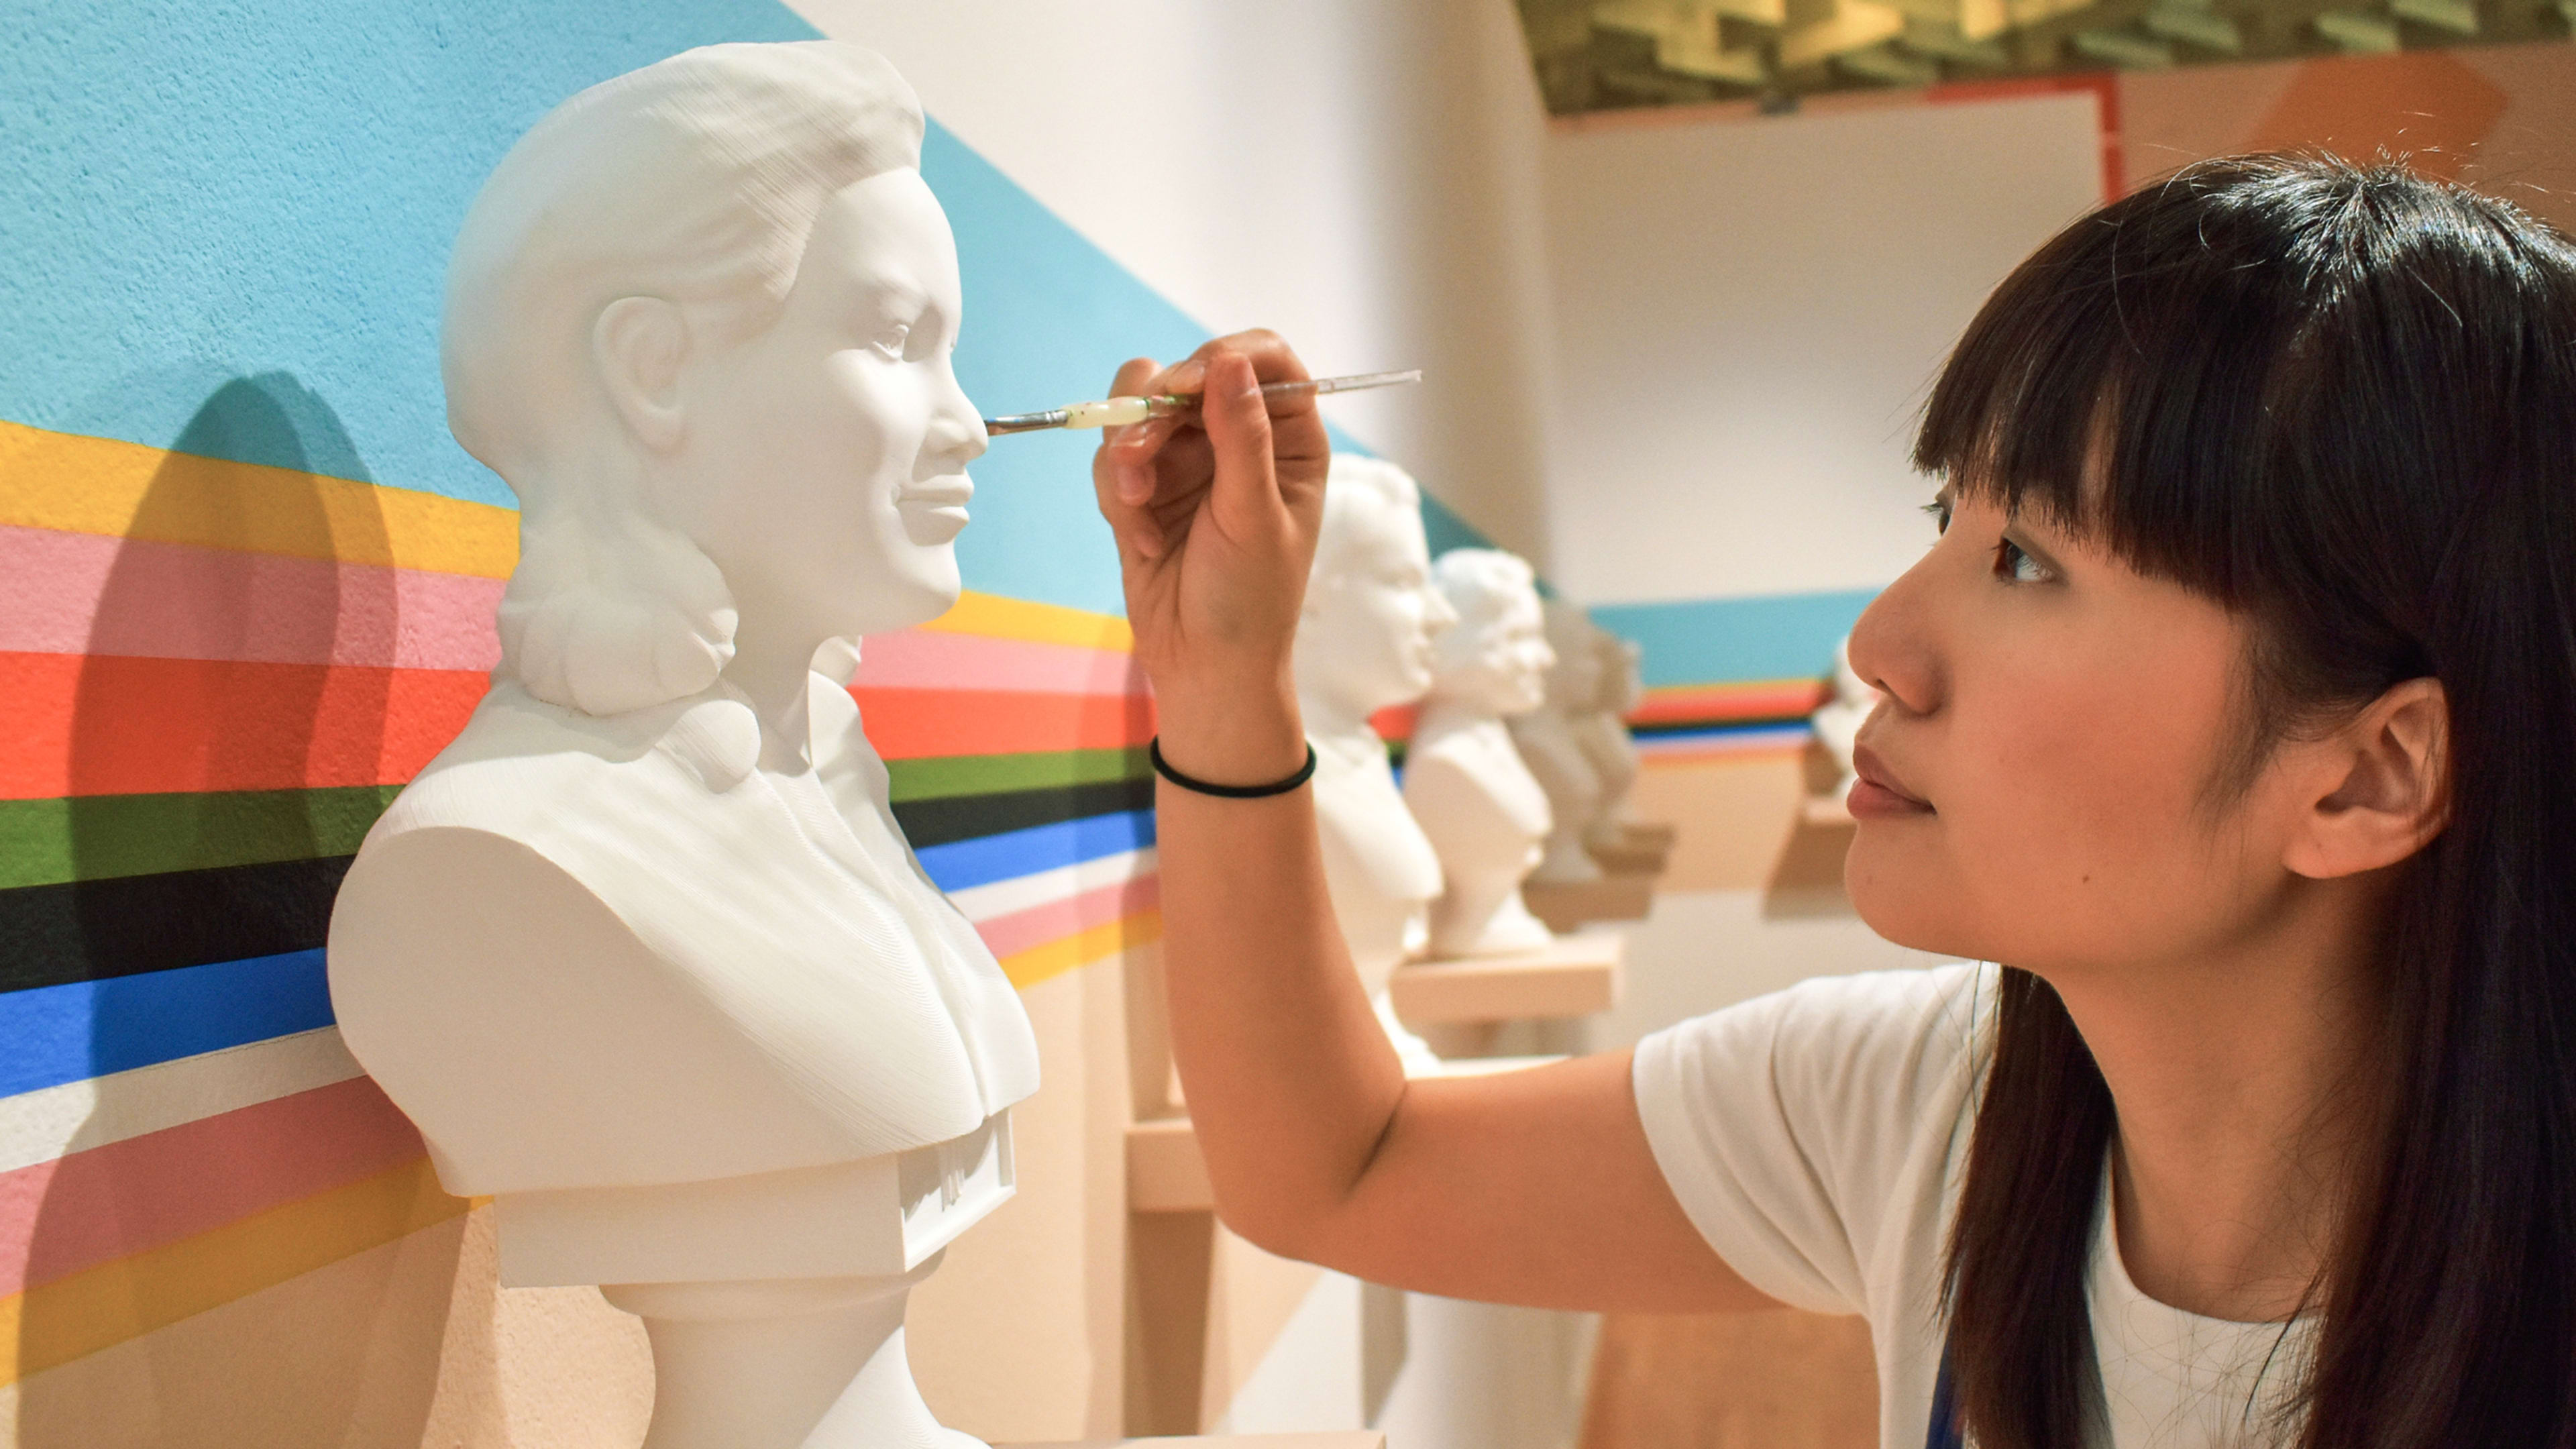 These 3D-printed sculptures celebrate amazing women in science and tech